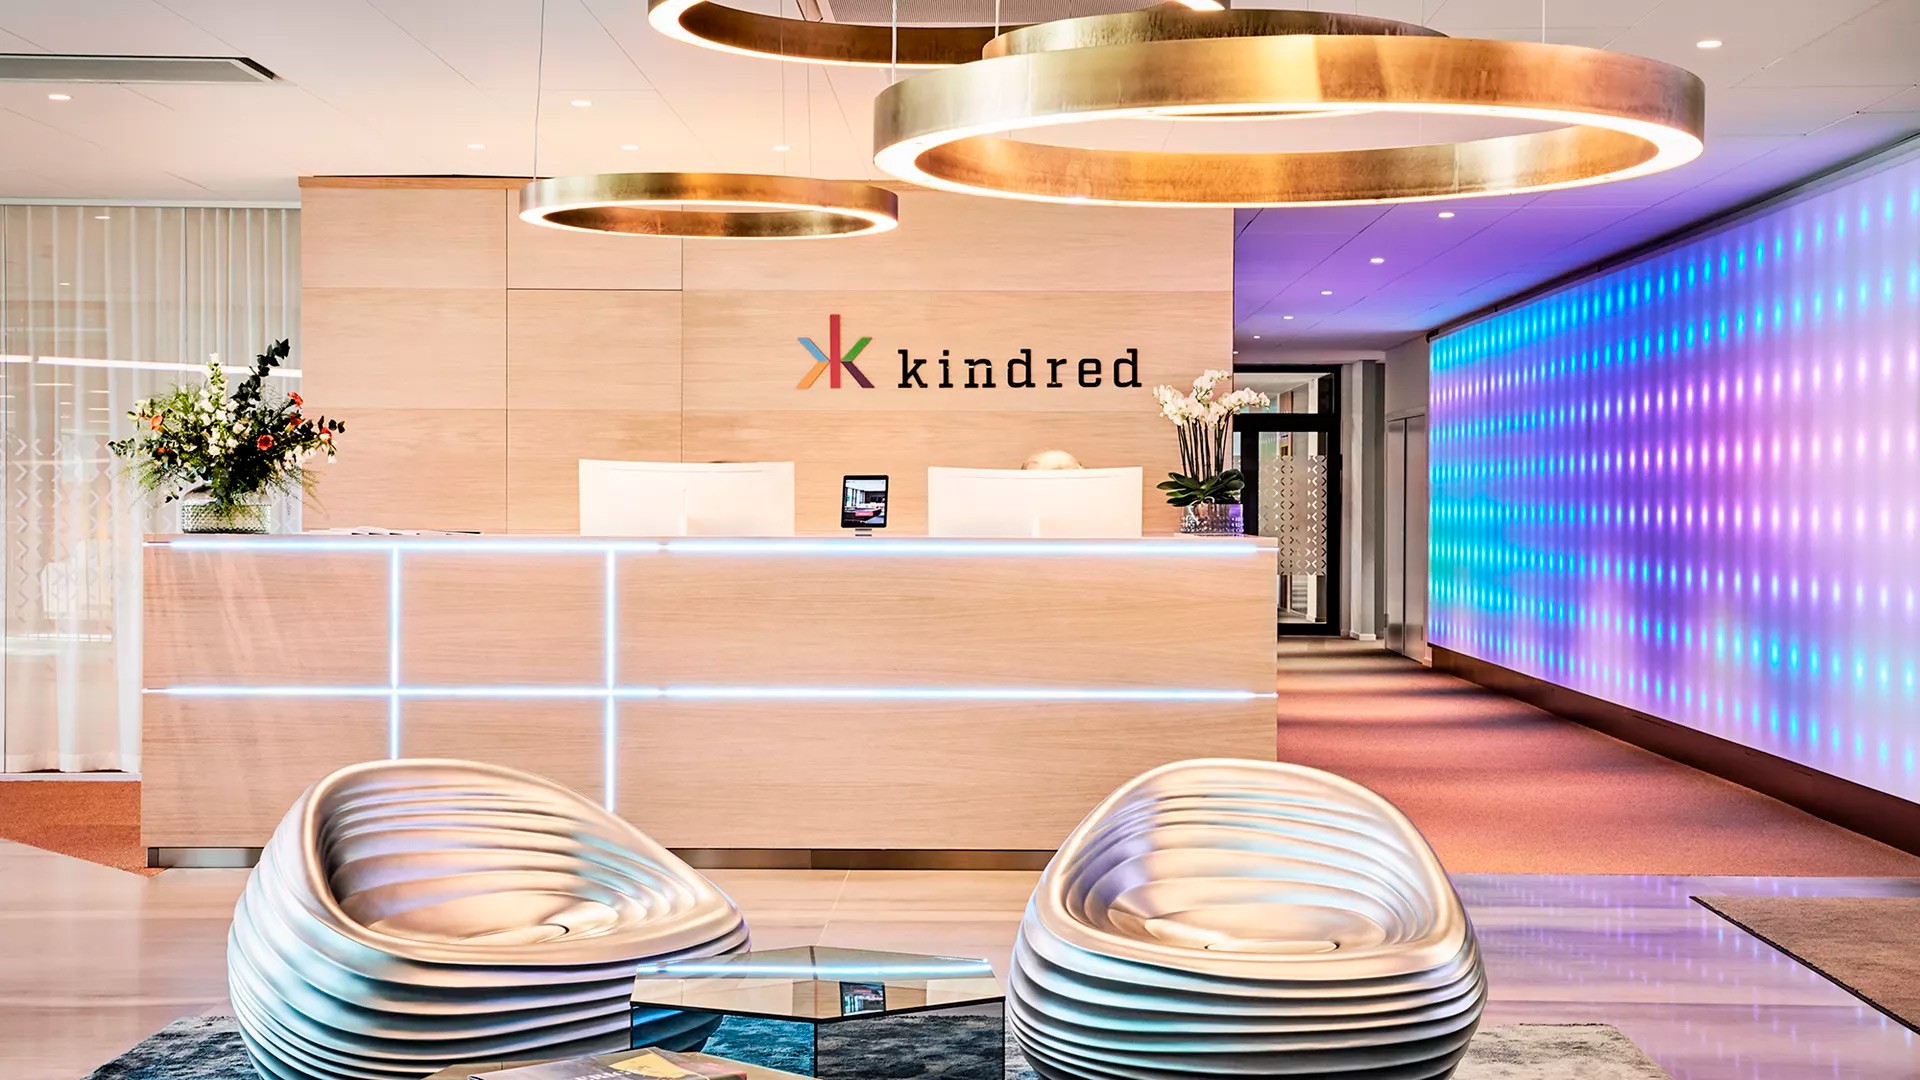 Kindred Group outlines new five fold strategy for sustainability